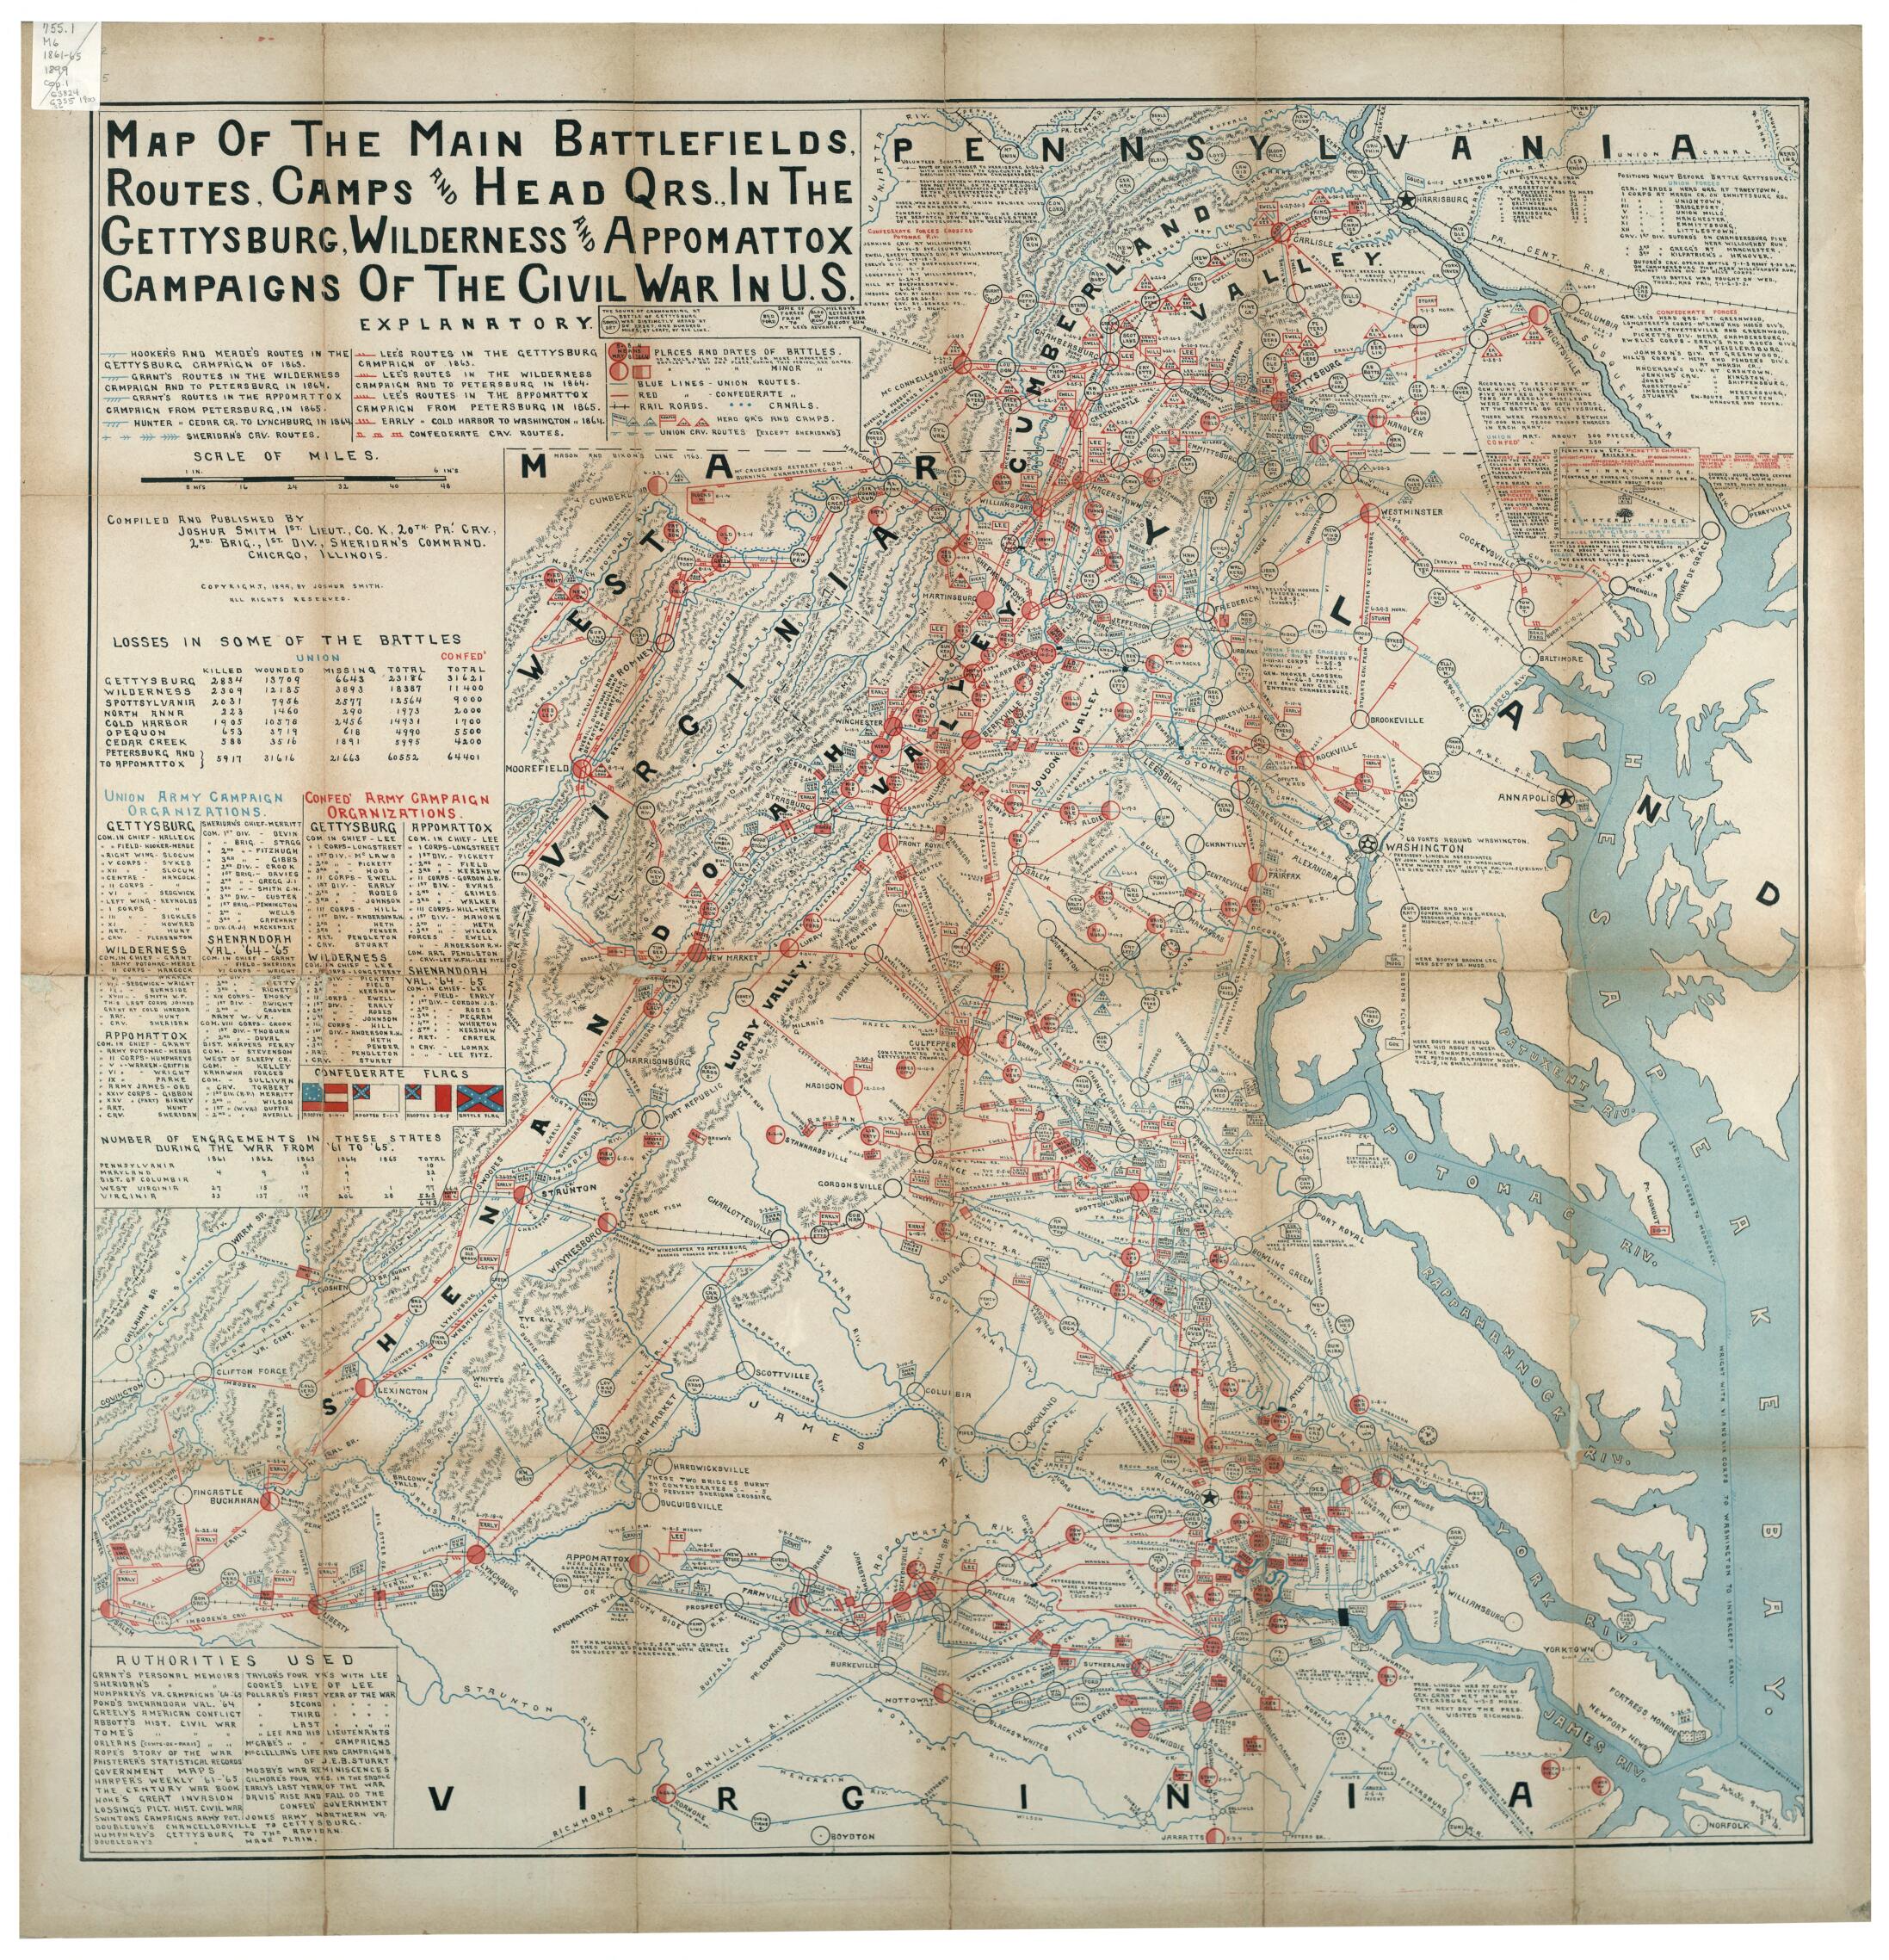 This old map of Map of the Main Battlefields, Routes, Camps and Head Qrs., In the Gettysburg, Wilderness and Appomattox Campaigns of the Civil War In U.S from 1900 was created by Joshua Smith in 1900